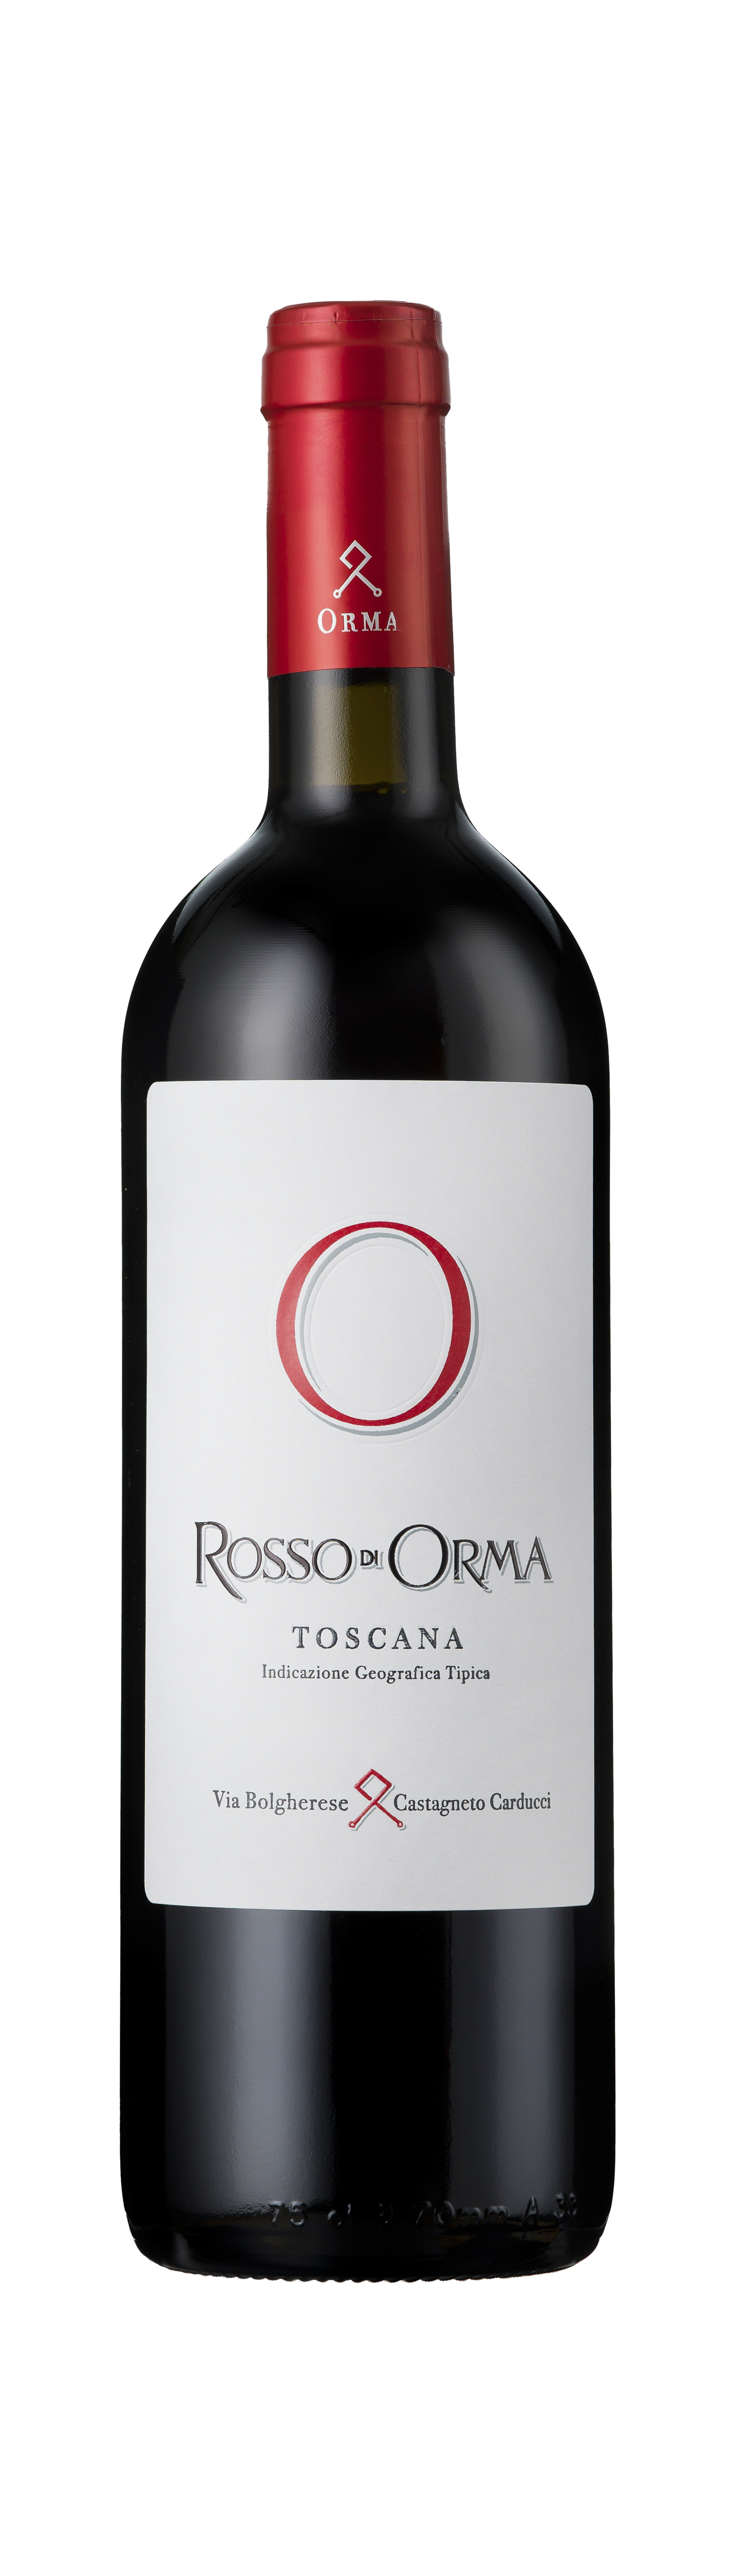 Bottle shot - Orma, Rosso Di Orma IGT, Tuscany, Italy